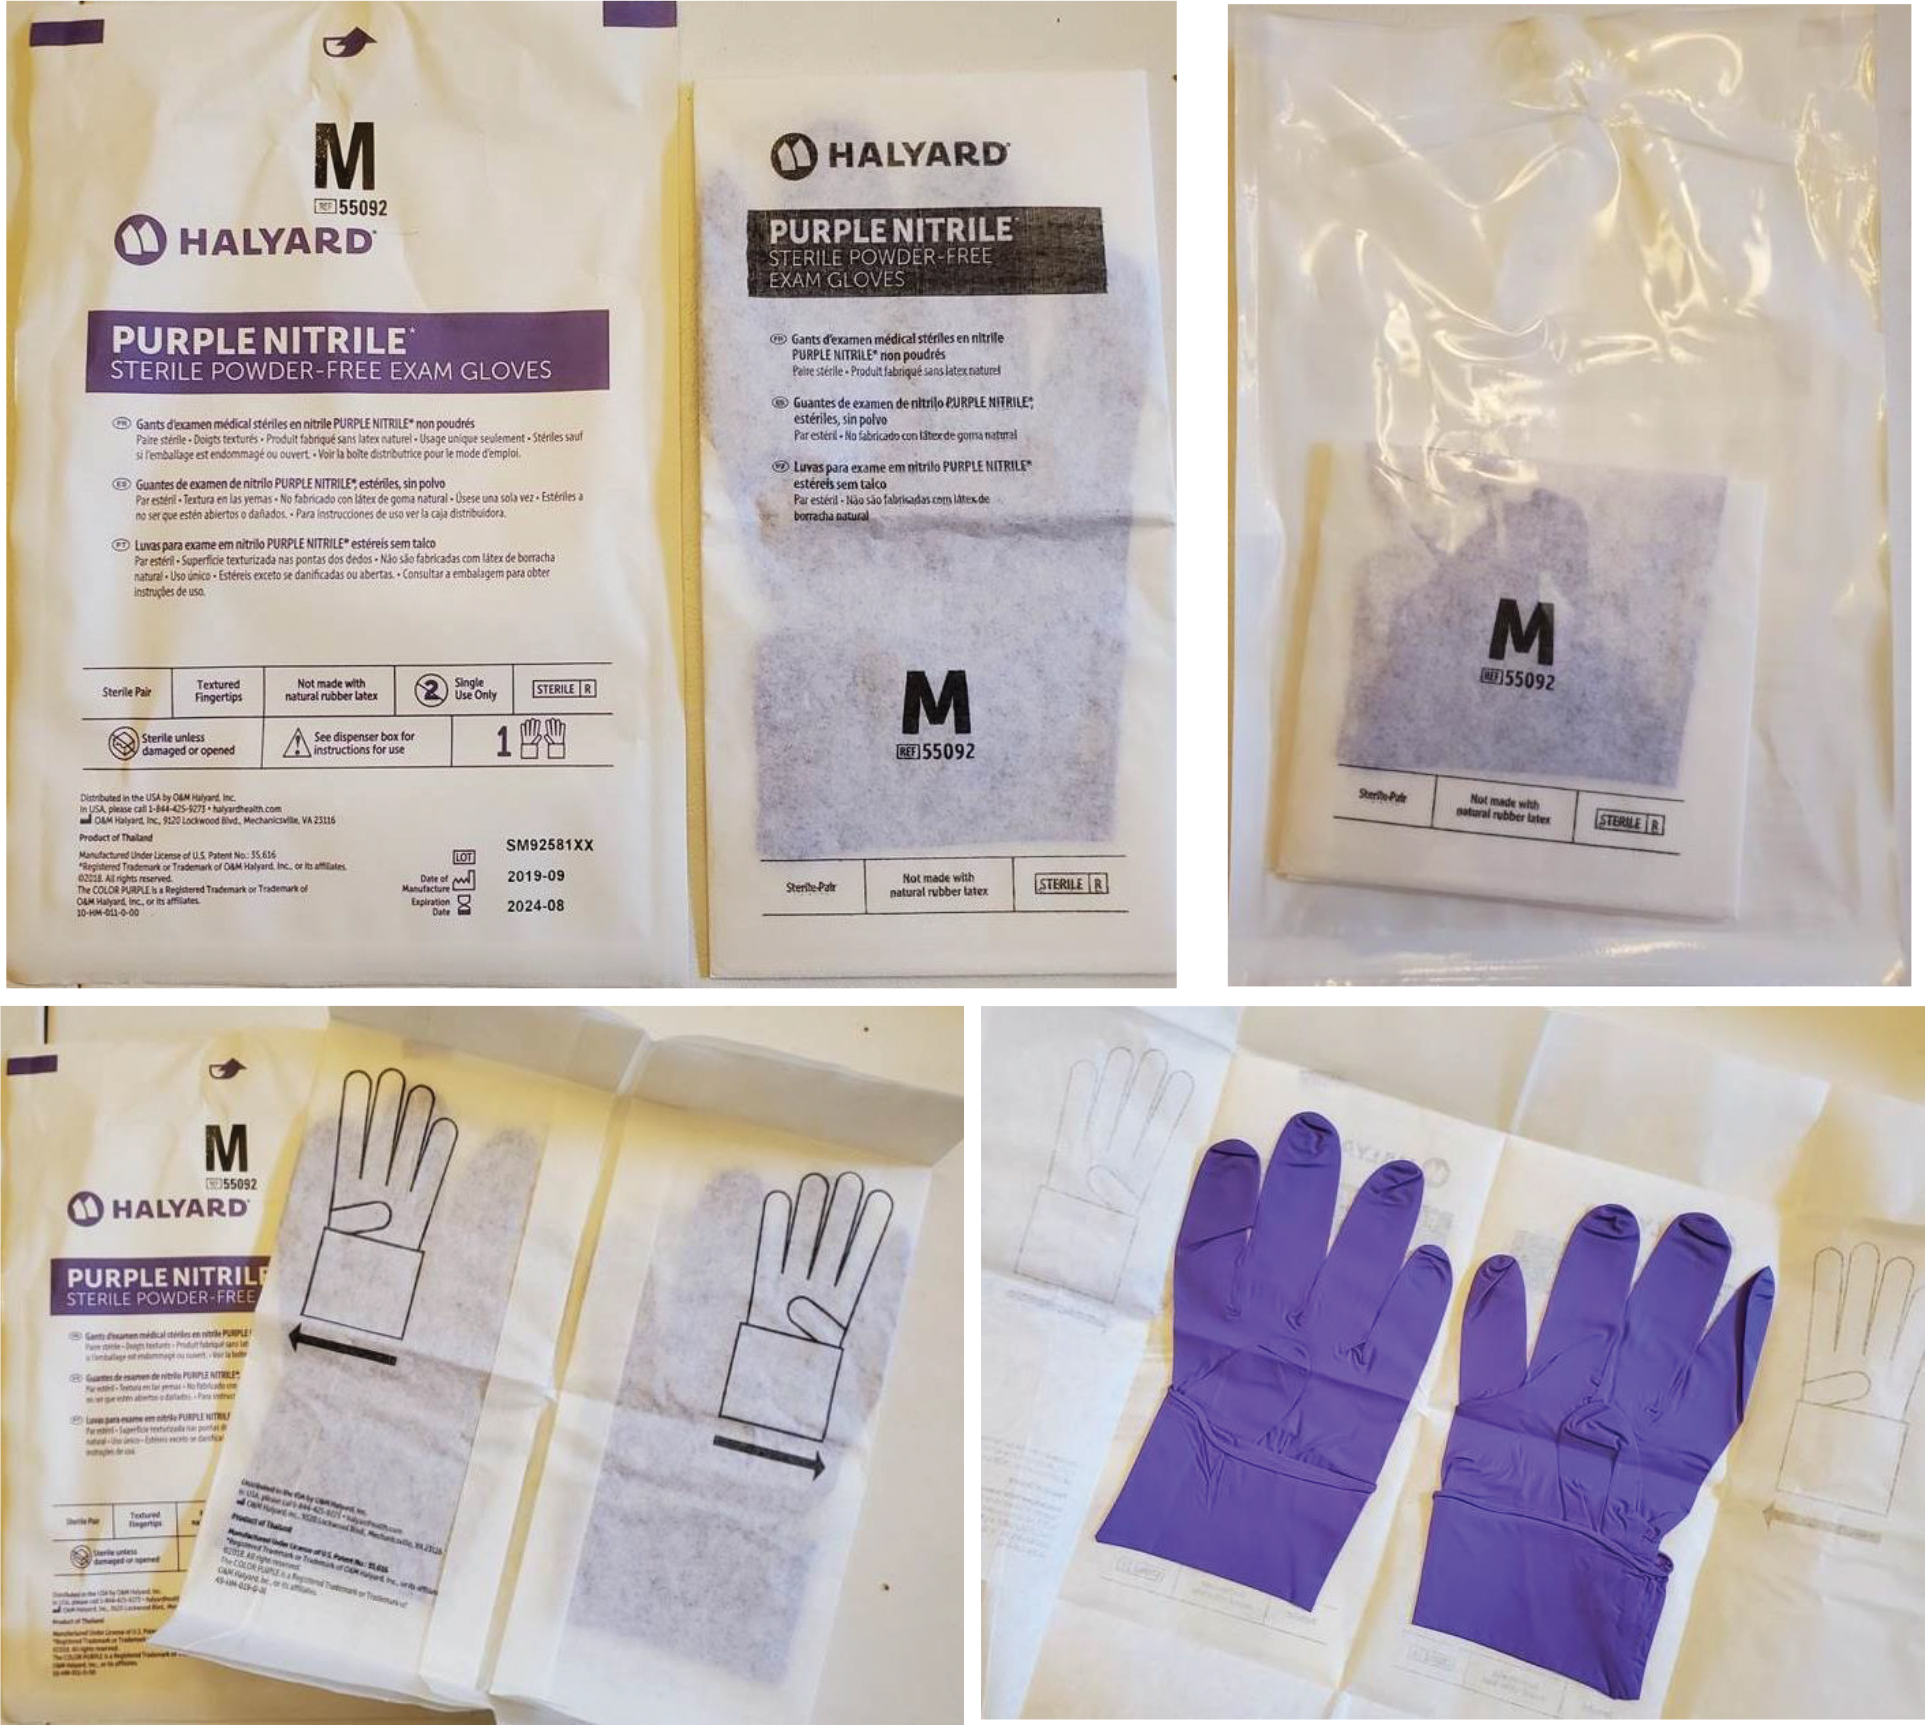 Single pair of sterile gloves for the self-donning glove challenge. If sterile gloves are not available, teachers can present students with regular gloves “packaged” in a sheet of construction paper or white copy paper.